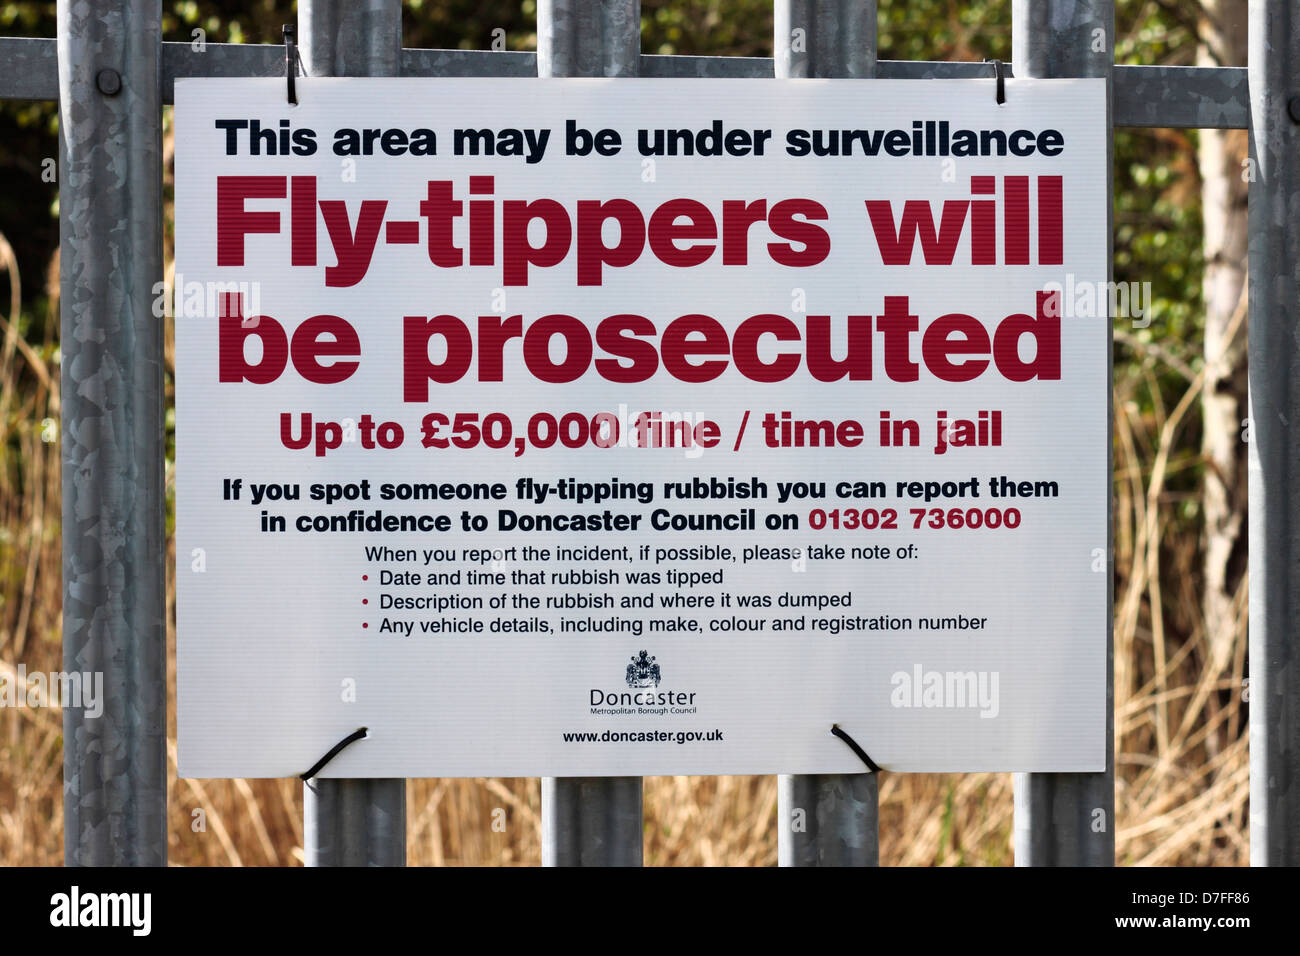 Fly-tippers will be prosecuted notice Stock Photo